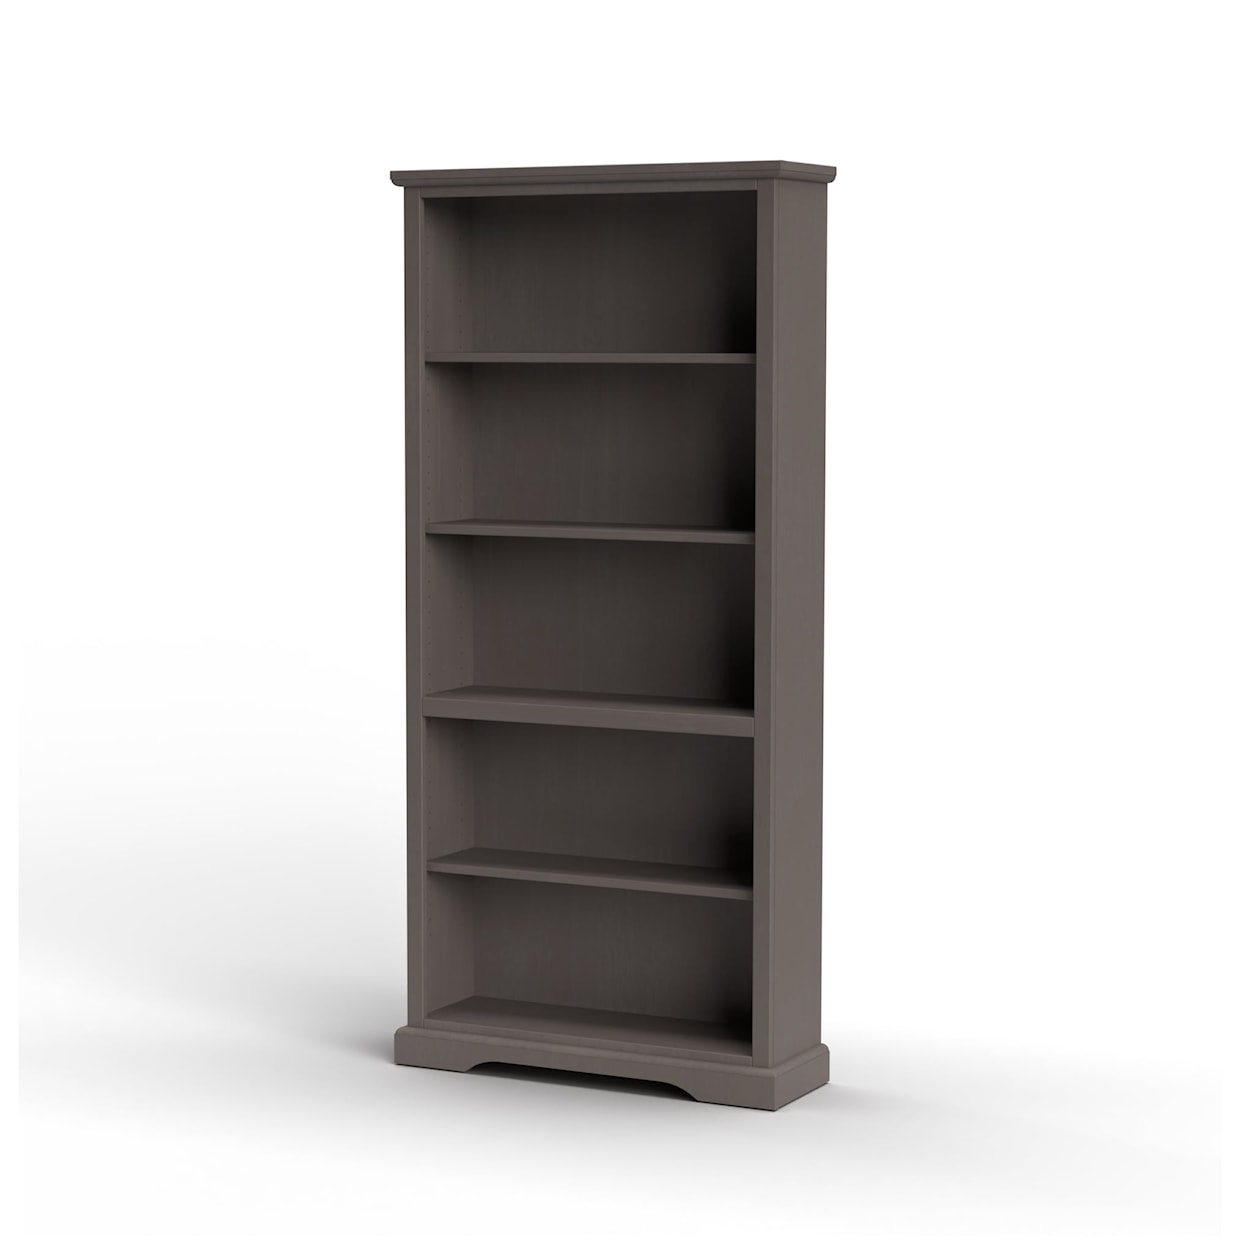 Legends Furniture Cheyenne Bookcase with Shelving